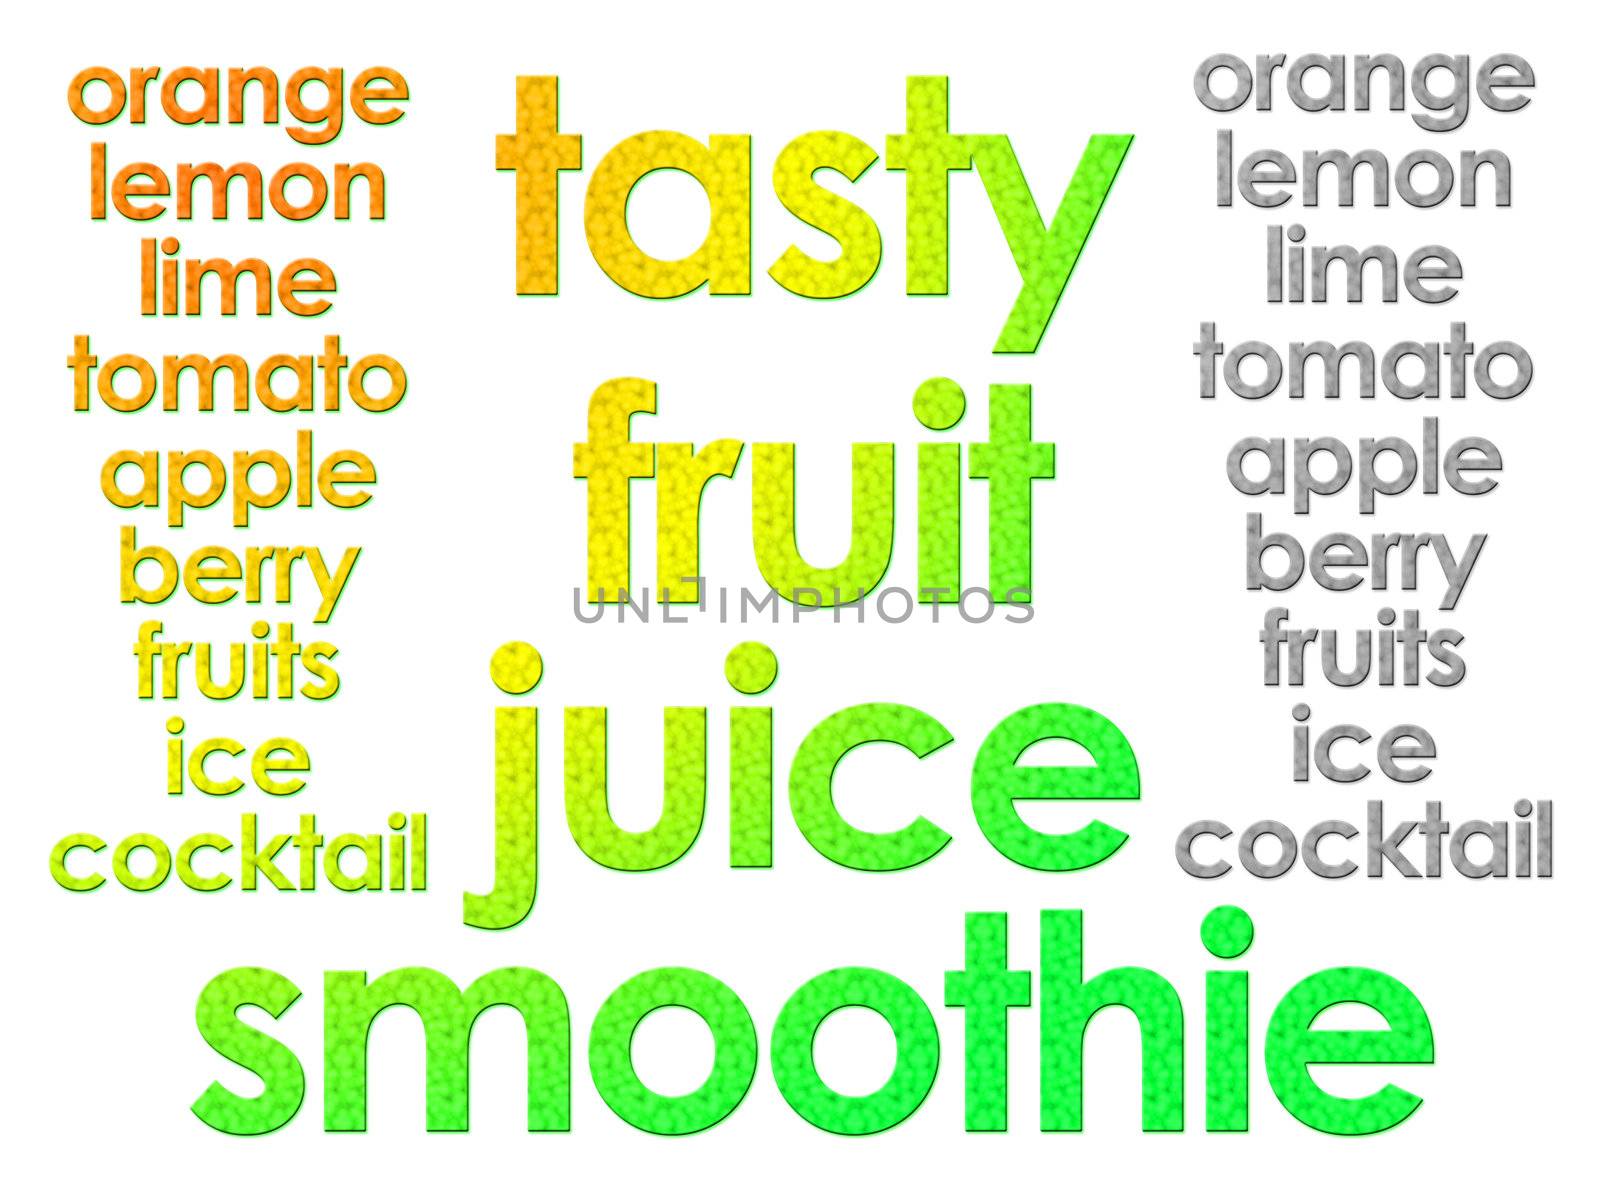 Glowing Tasty Fruit Juice Smoothie Text for Websites or Labellin by bobbigmac